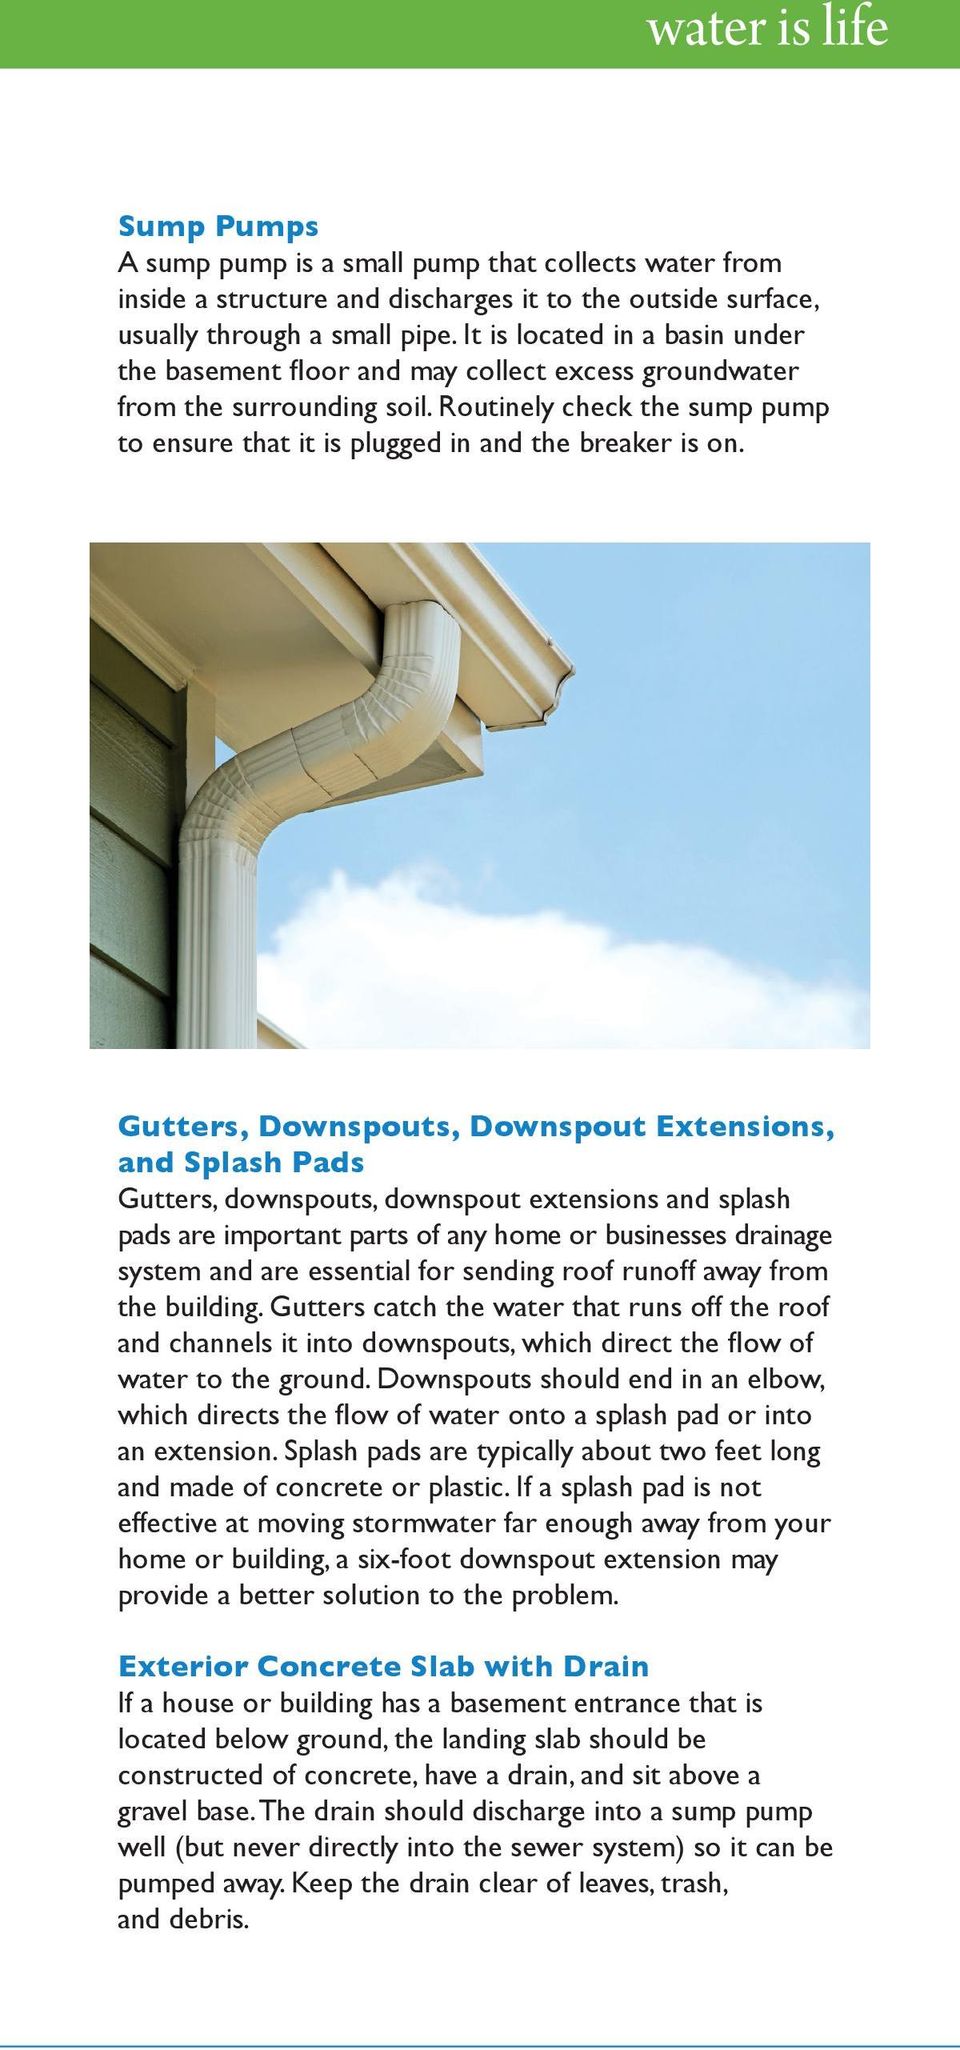 Gutters, Downspouts, Downspout Extensions, and Splash Pads Gutters, downspouts, downspout extensions and splash pads are important parts of any home or businesses drainage system and are essential